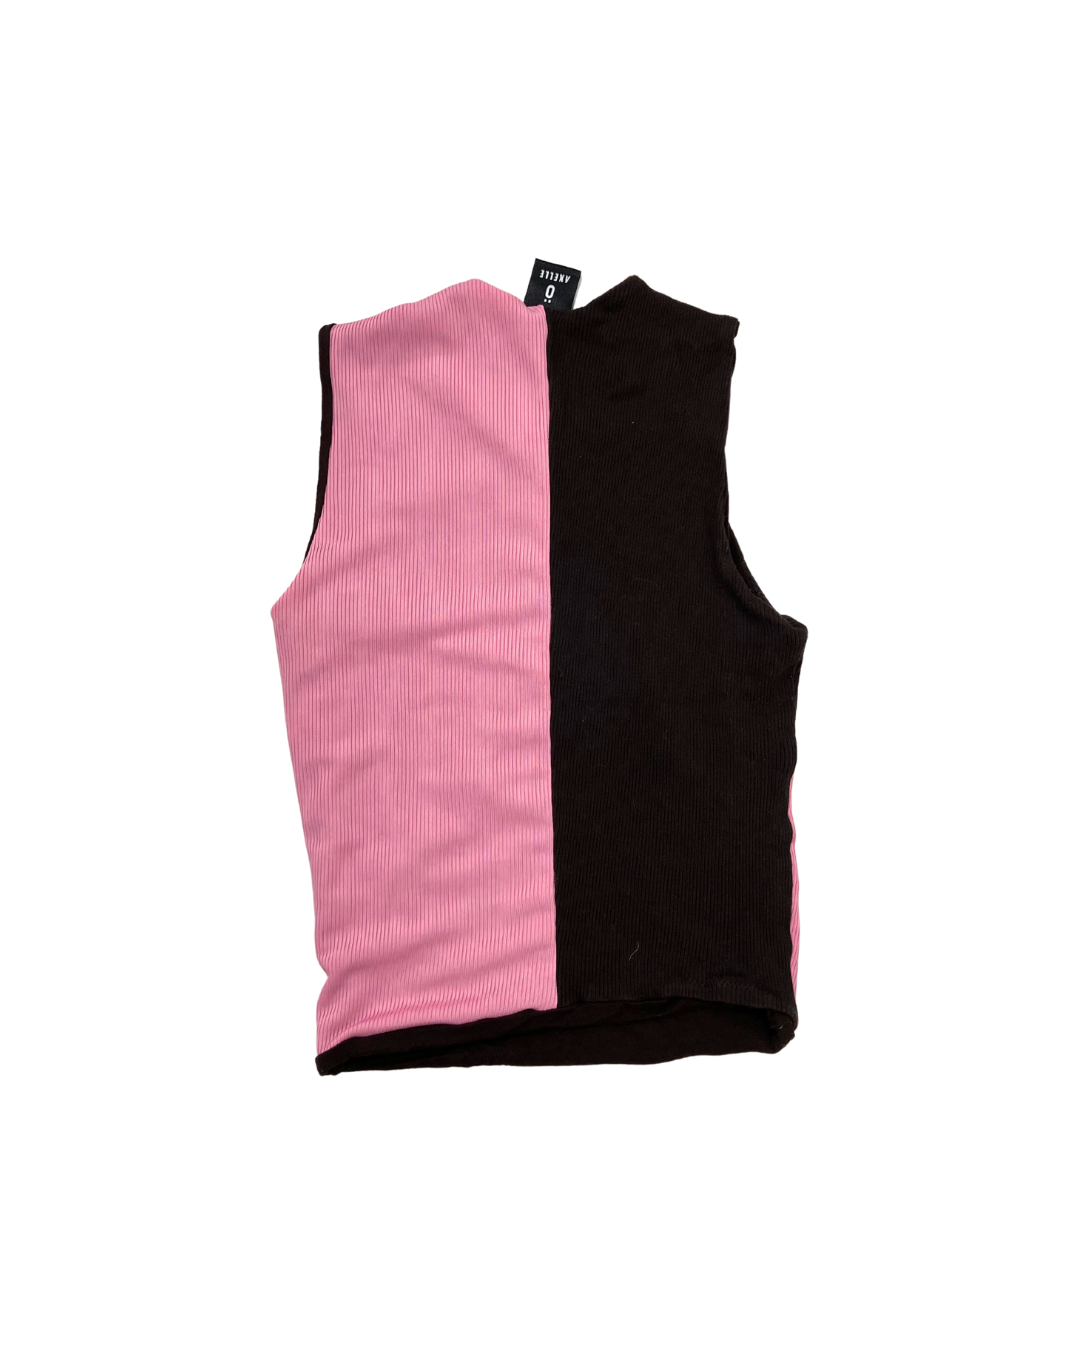 Axelle Pink and Brown Tank Top